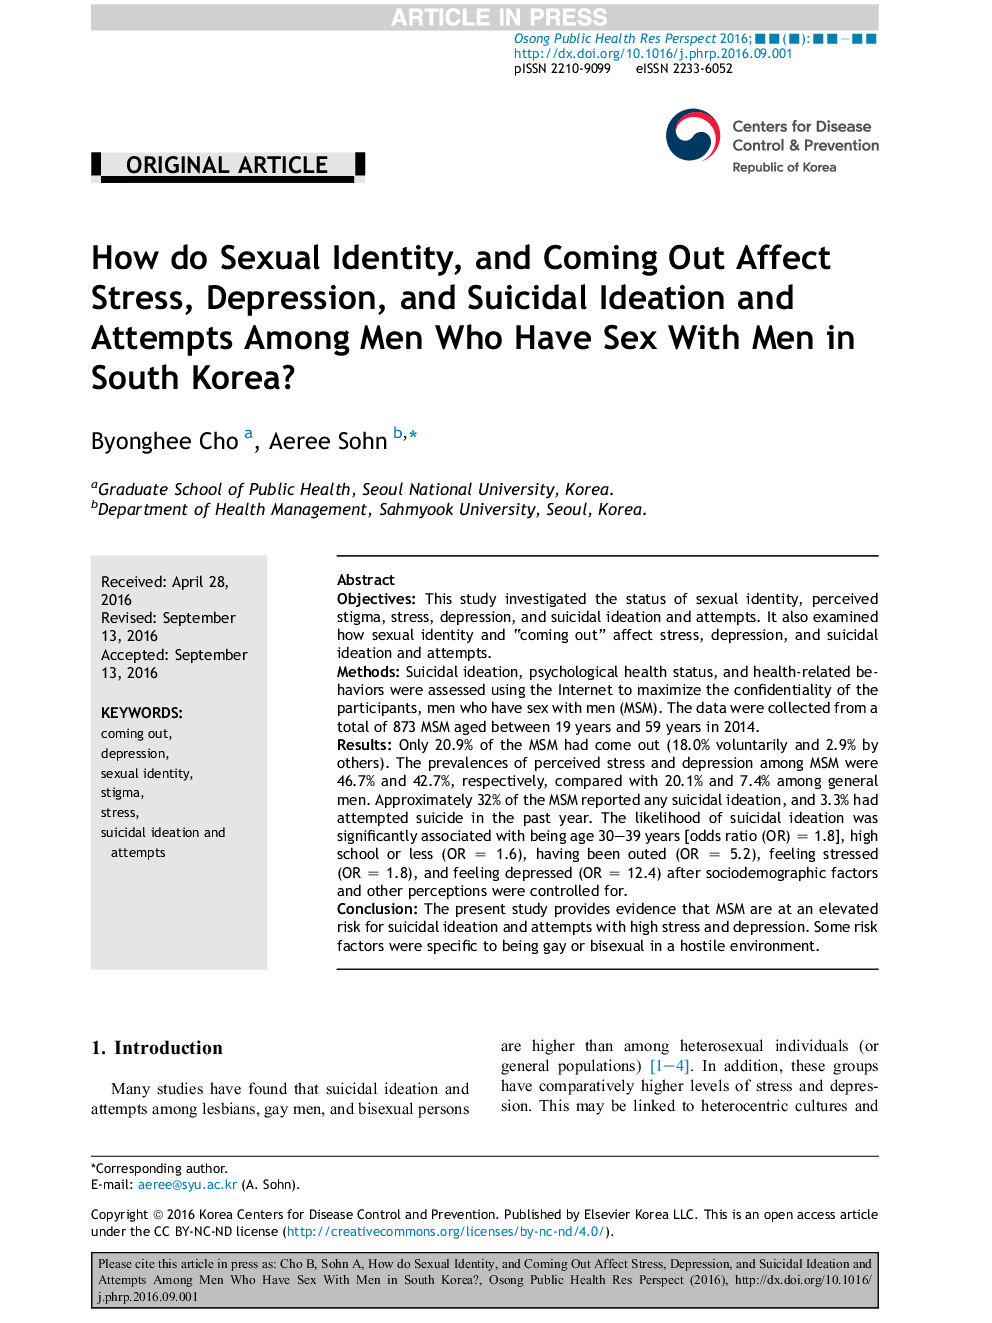 How do Sexual Identity, and Coming Out Affect Stress, Depression, and Suicidal Ideation and Attempts Among Men Who Have Sex With Men in South Korea?